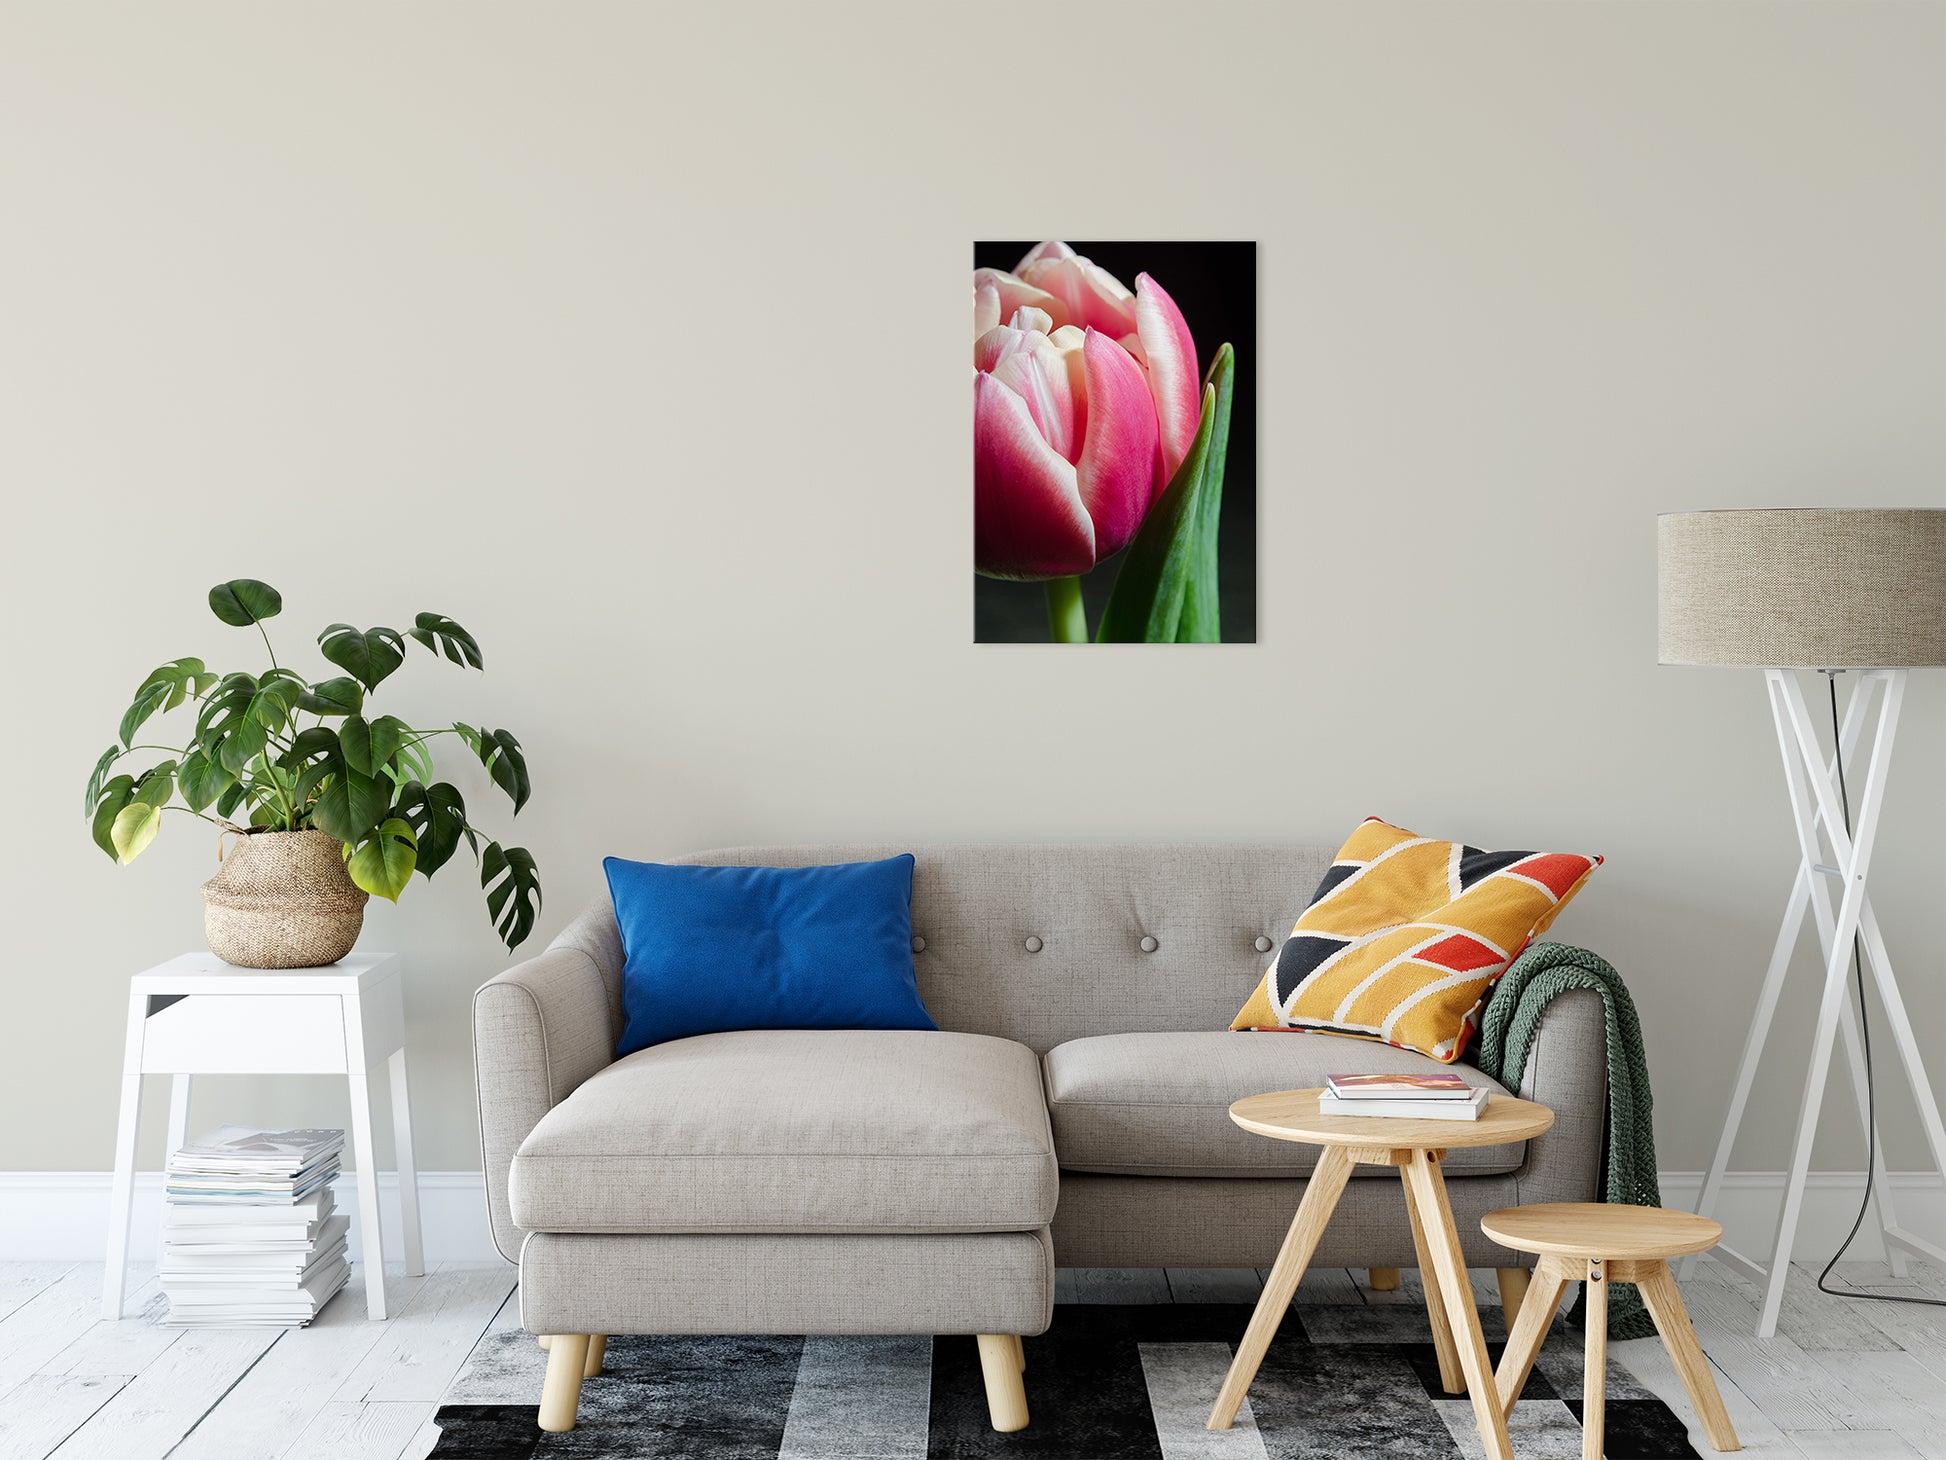 Pink and White Tulip Nature / Floral Photo Fine Art Canvas Wall Art Prints 20" x 30" - PIPAFINEART